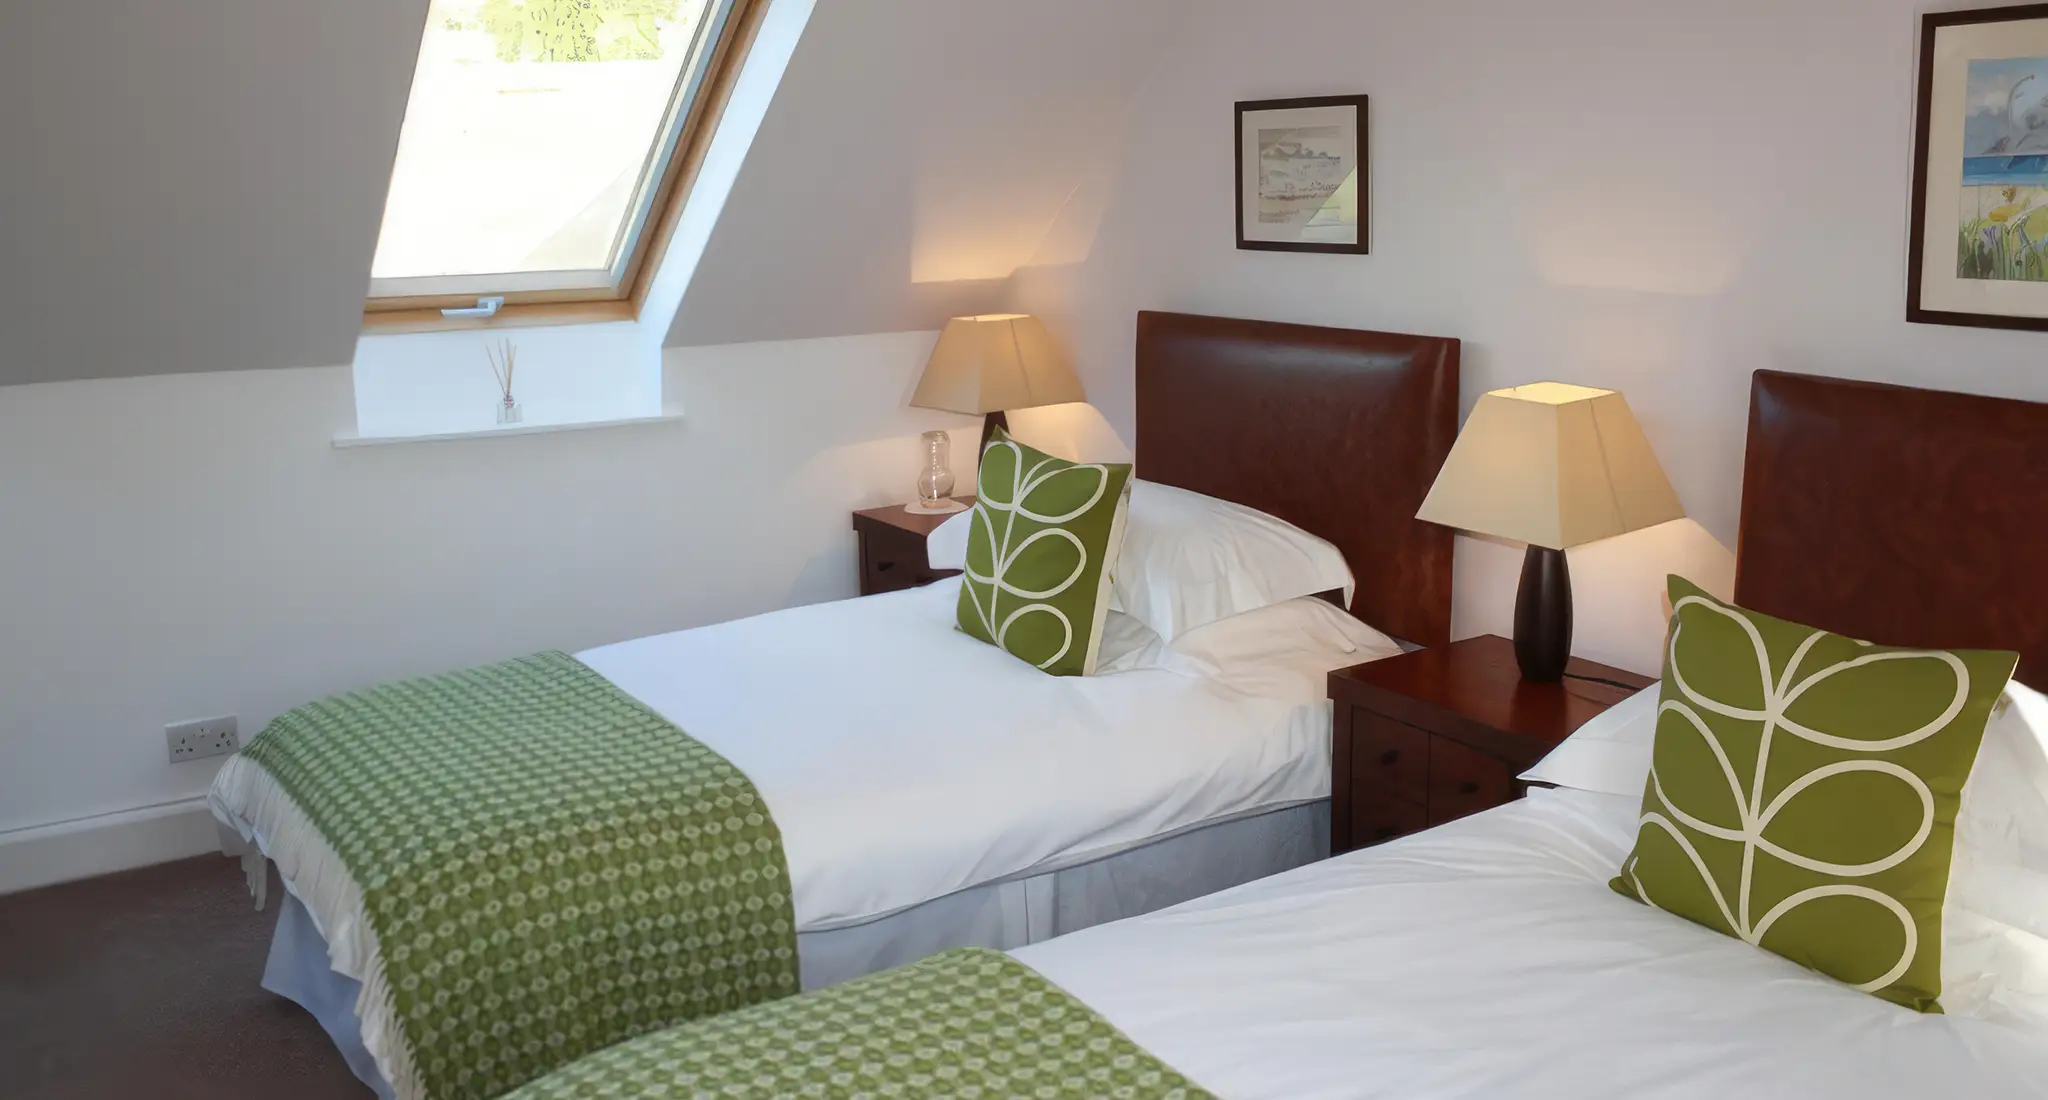 two neatly made beds with crisp white linens in a cozy room adorned with a window, located at baldiesburn hotel in scotland.